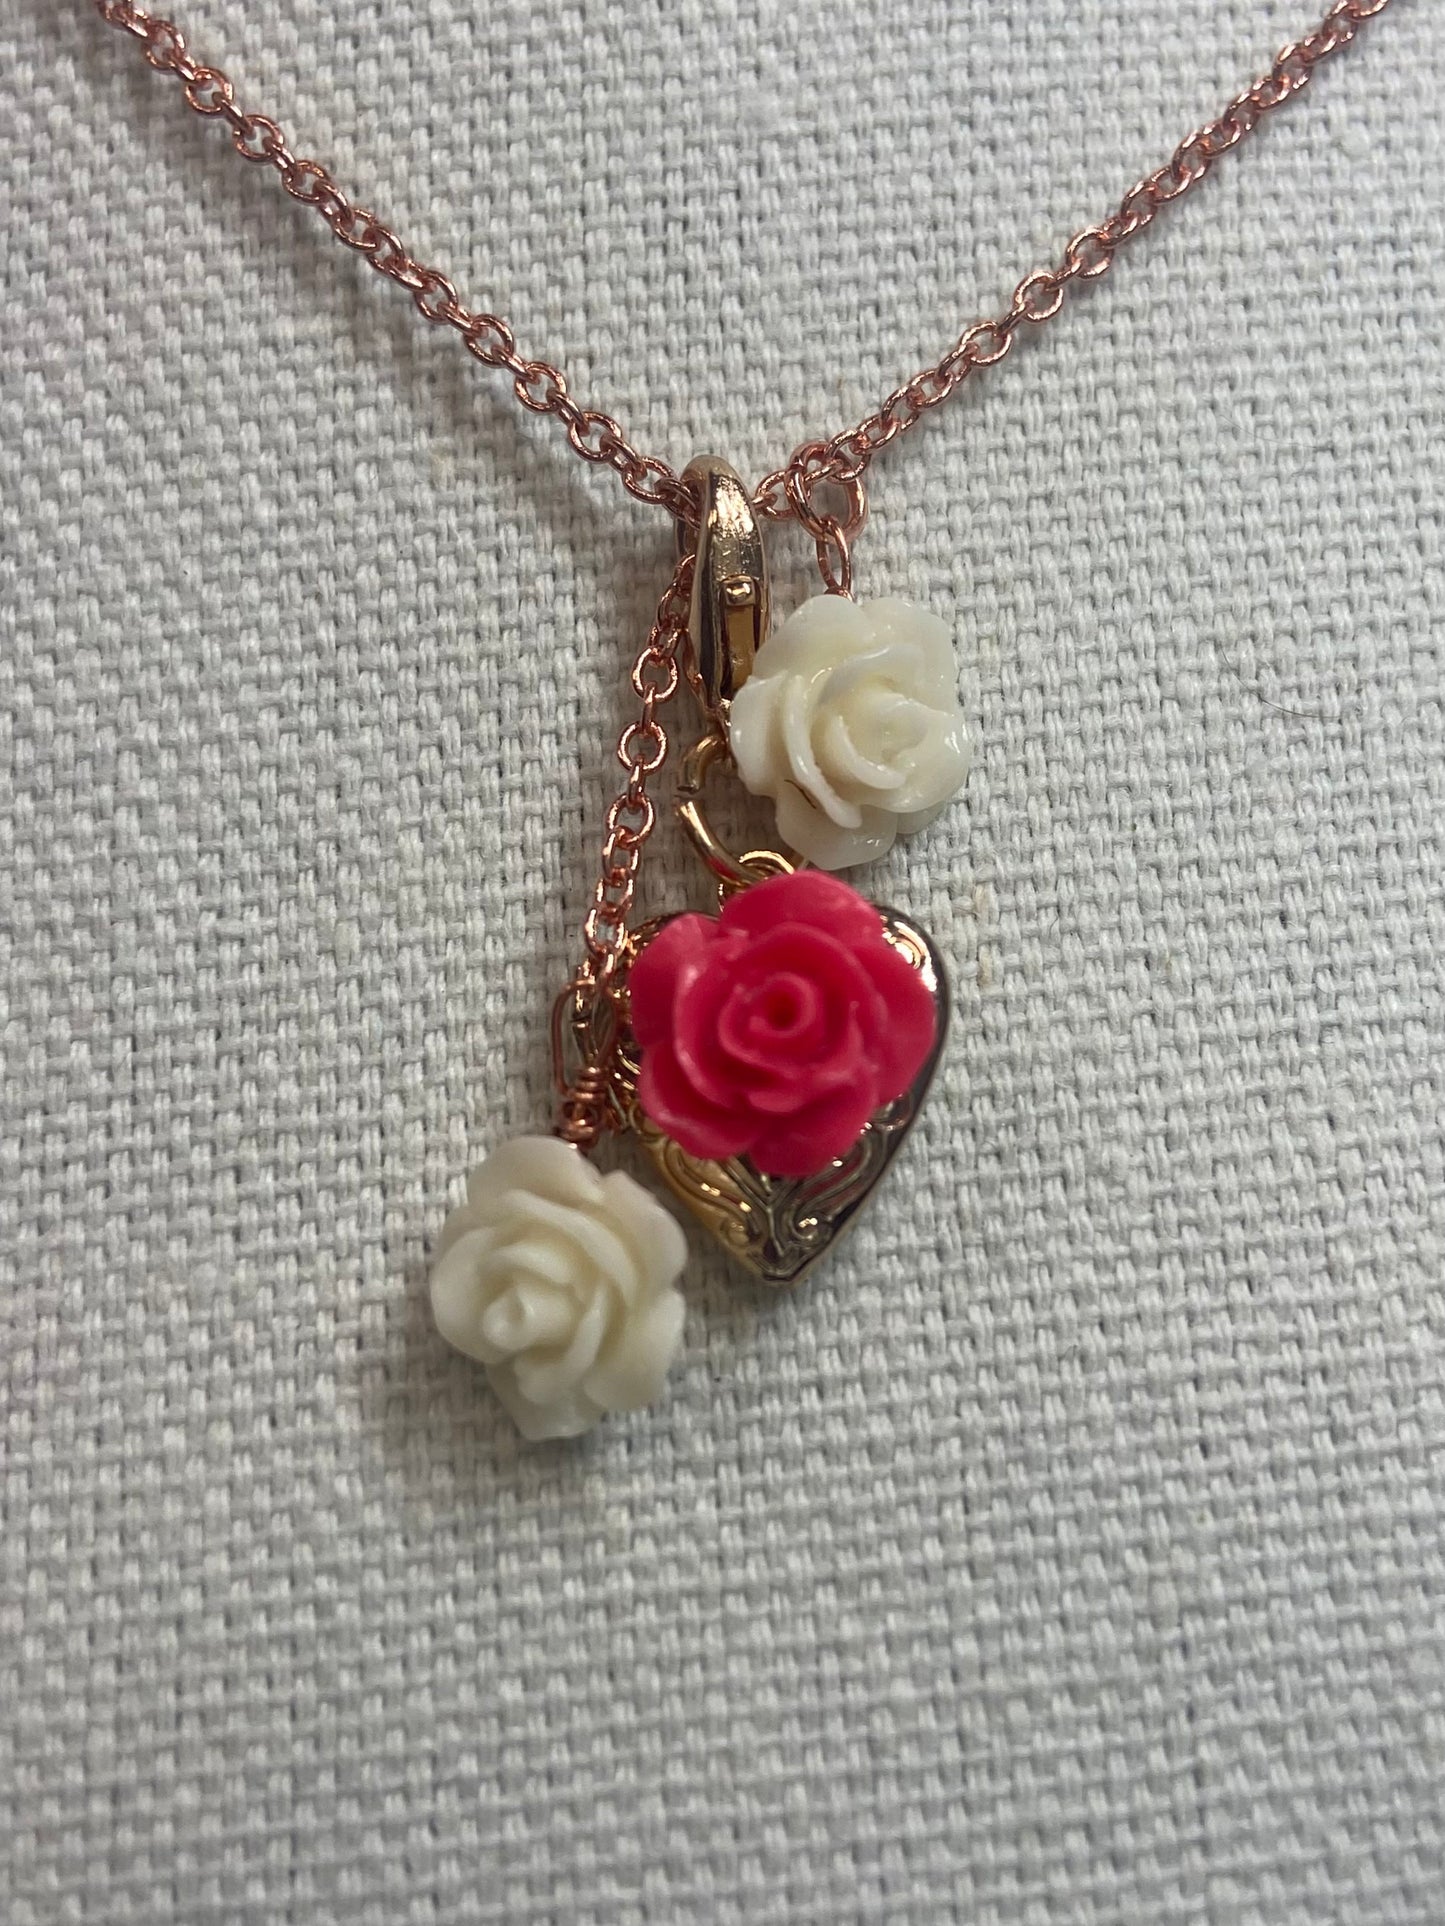 Necklace white and red rose locket